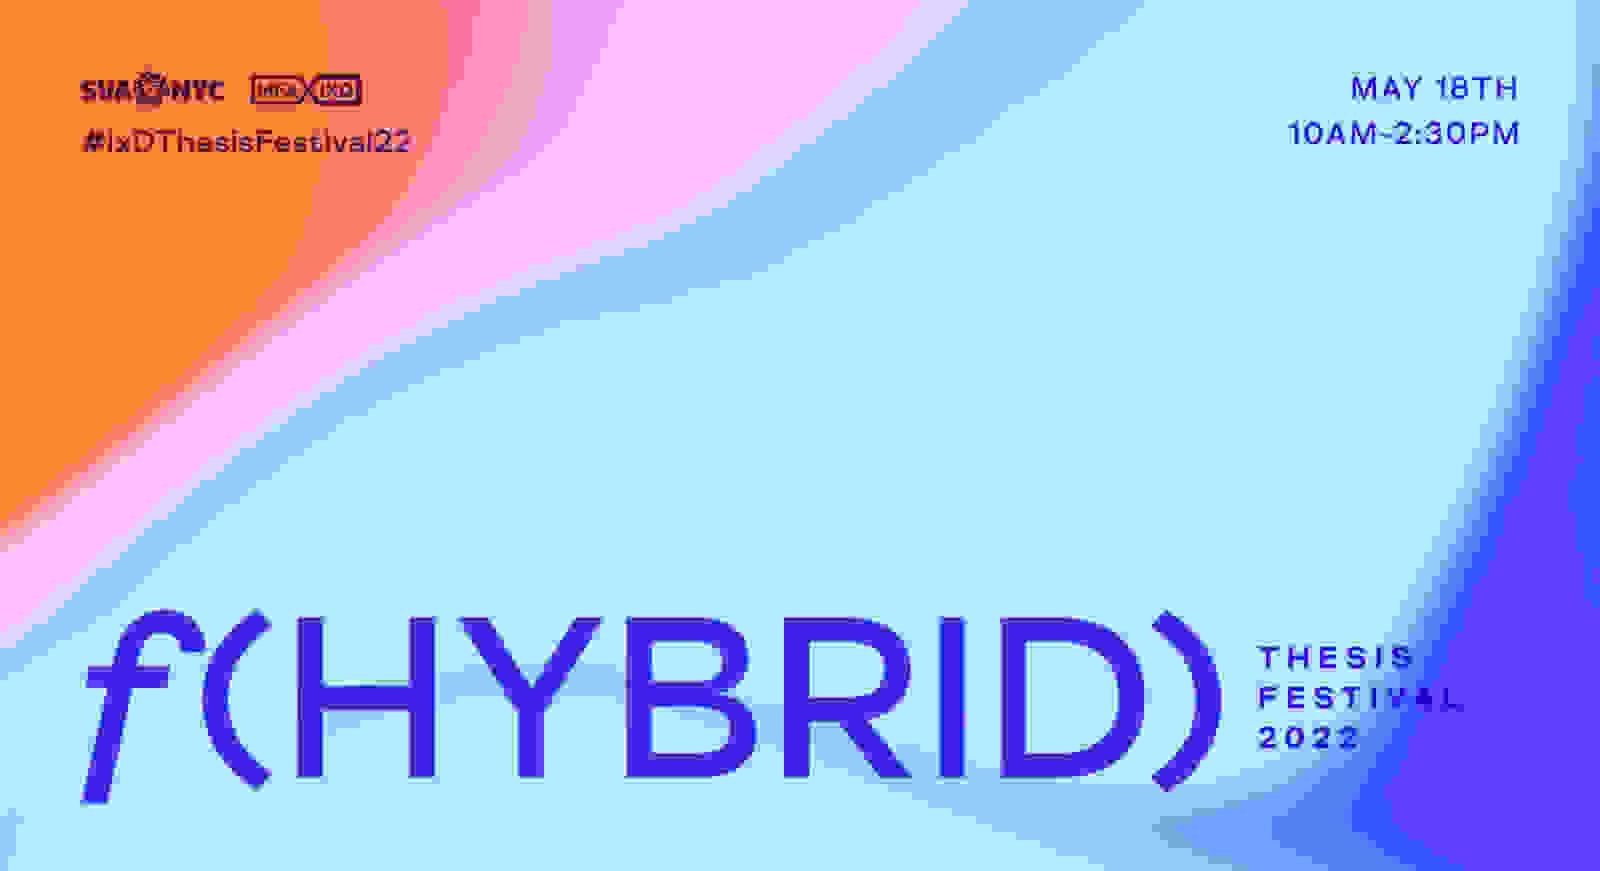 The event title Hybrid sits atop a colorful swirl of bright blue blending into orange with a streak of pale pink.